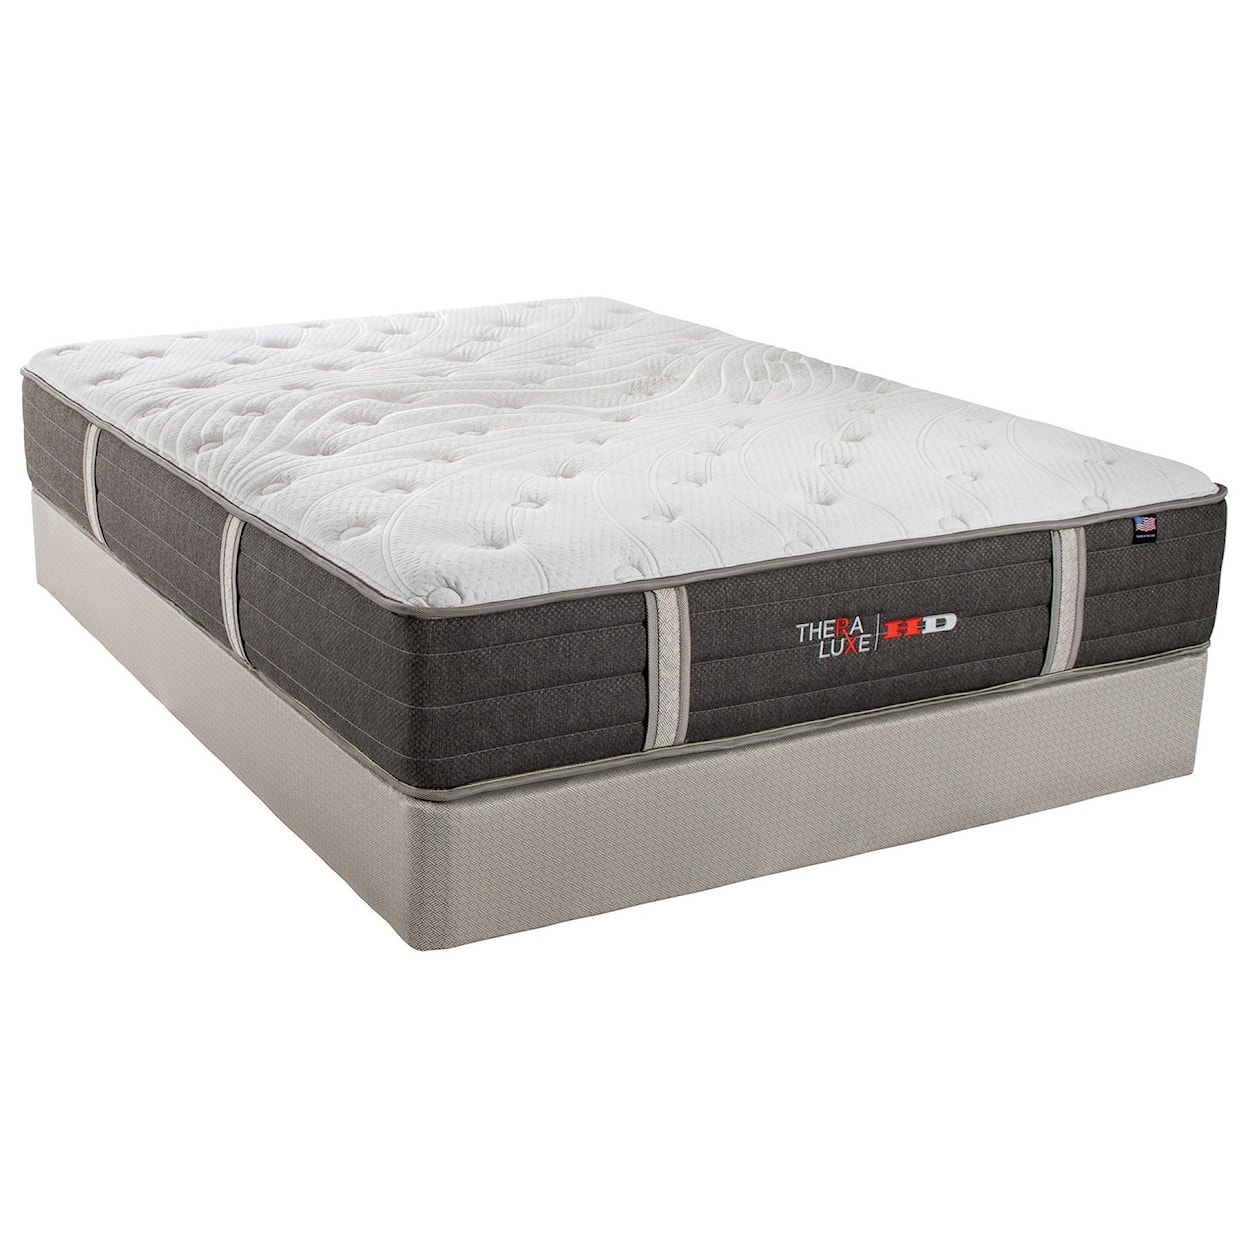 Therapedic Theraluxe Aspen Cal King Firm Pocketed Coil Mattress Set